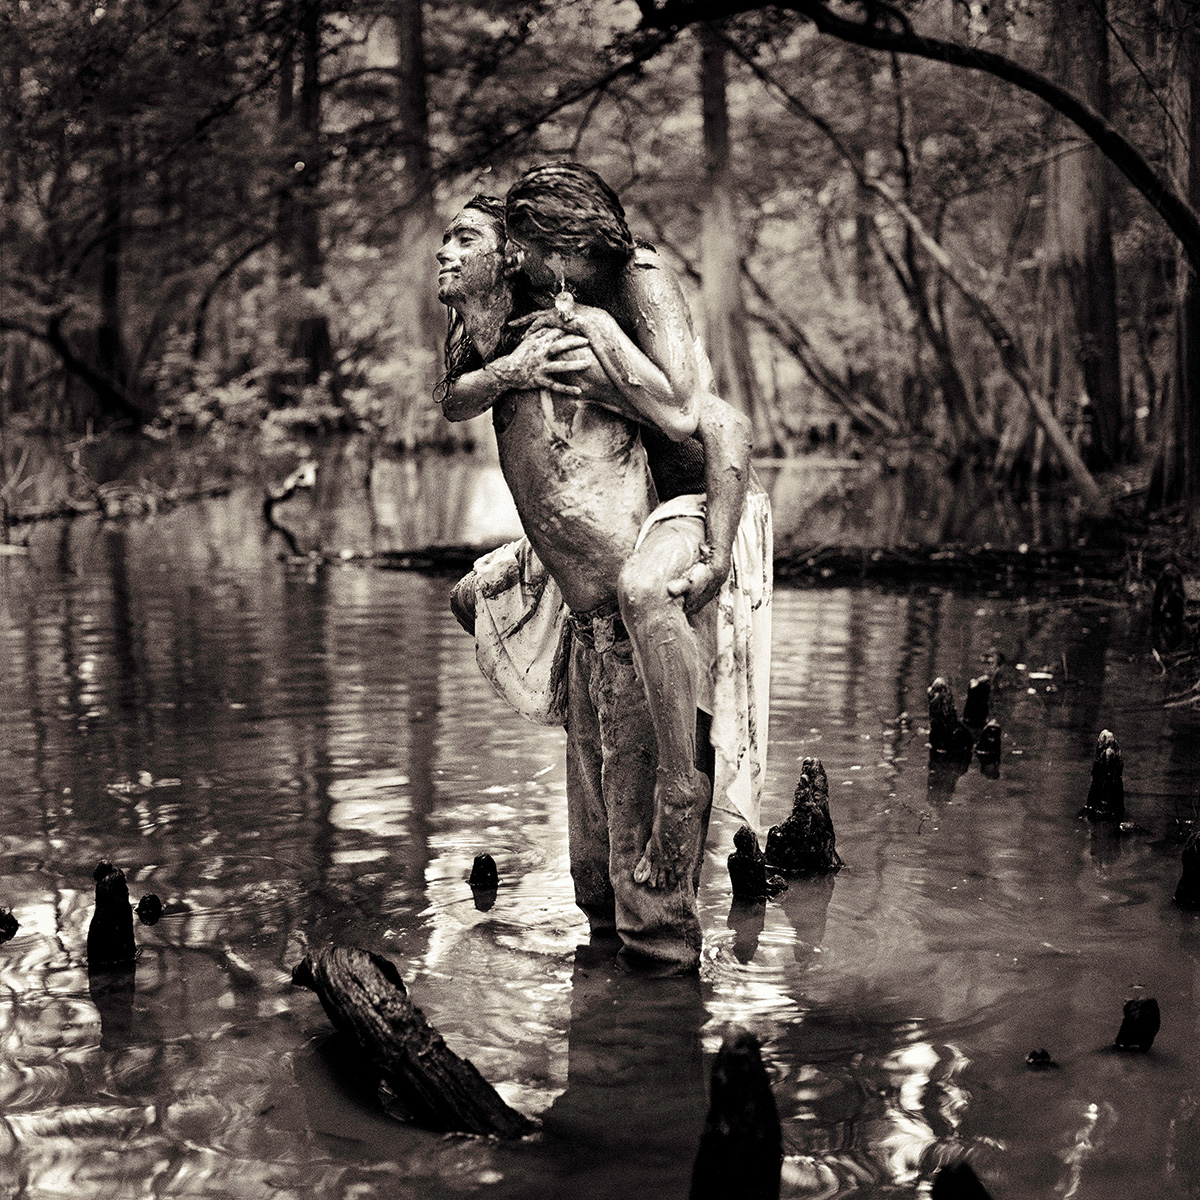 Woman clings to the back of a man as they stand in the swamp